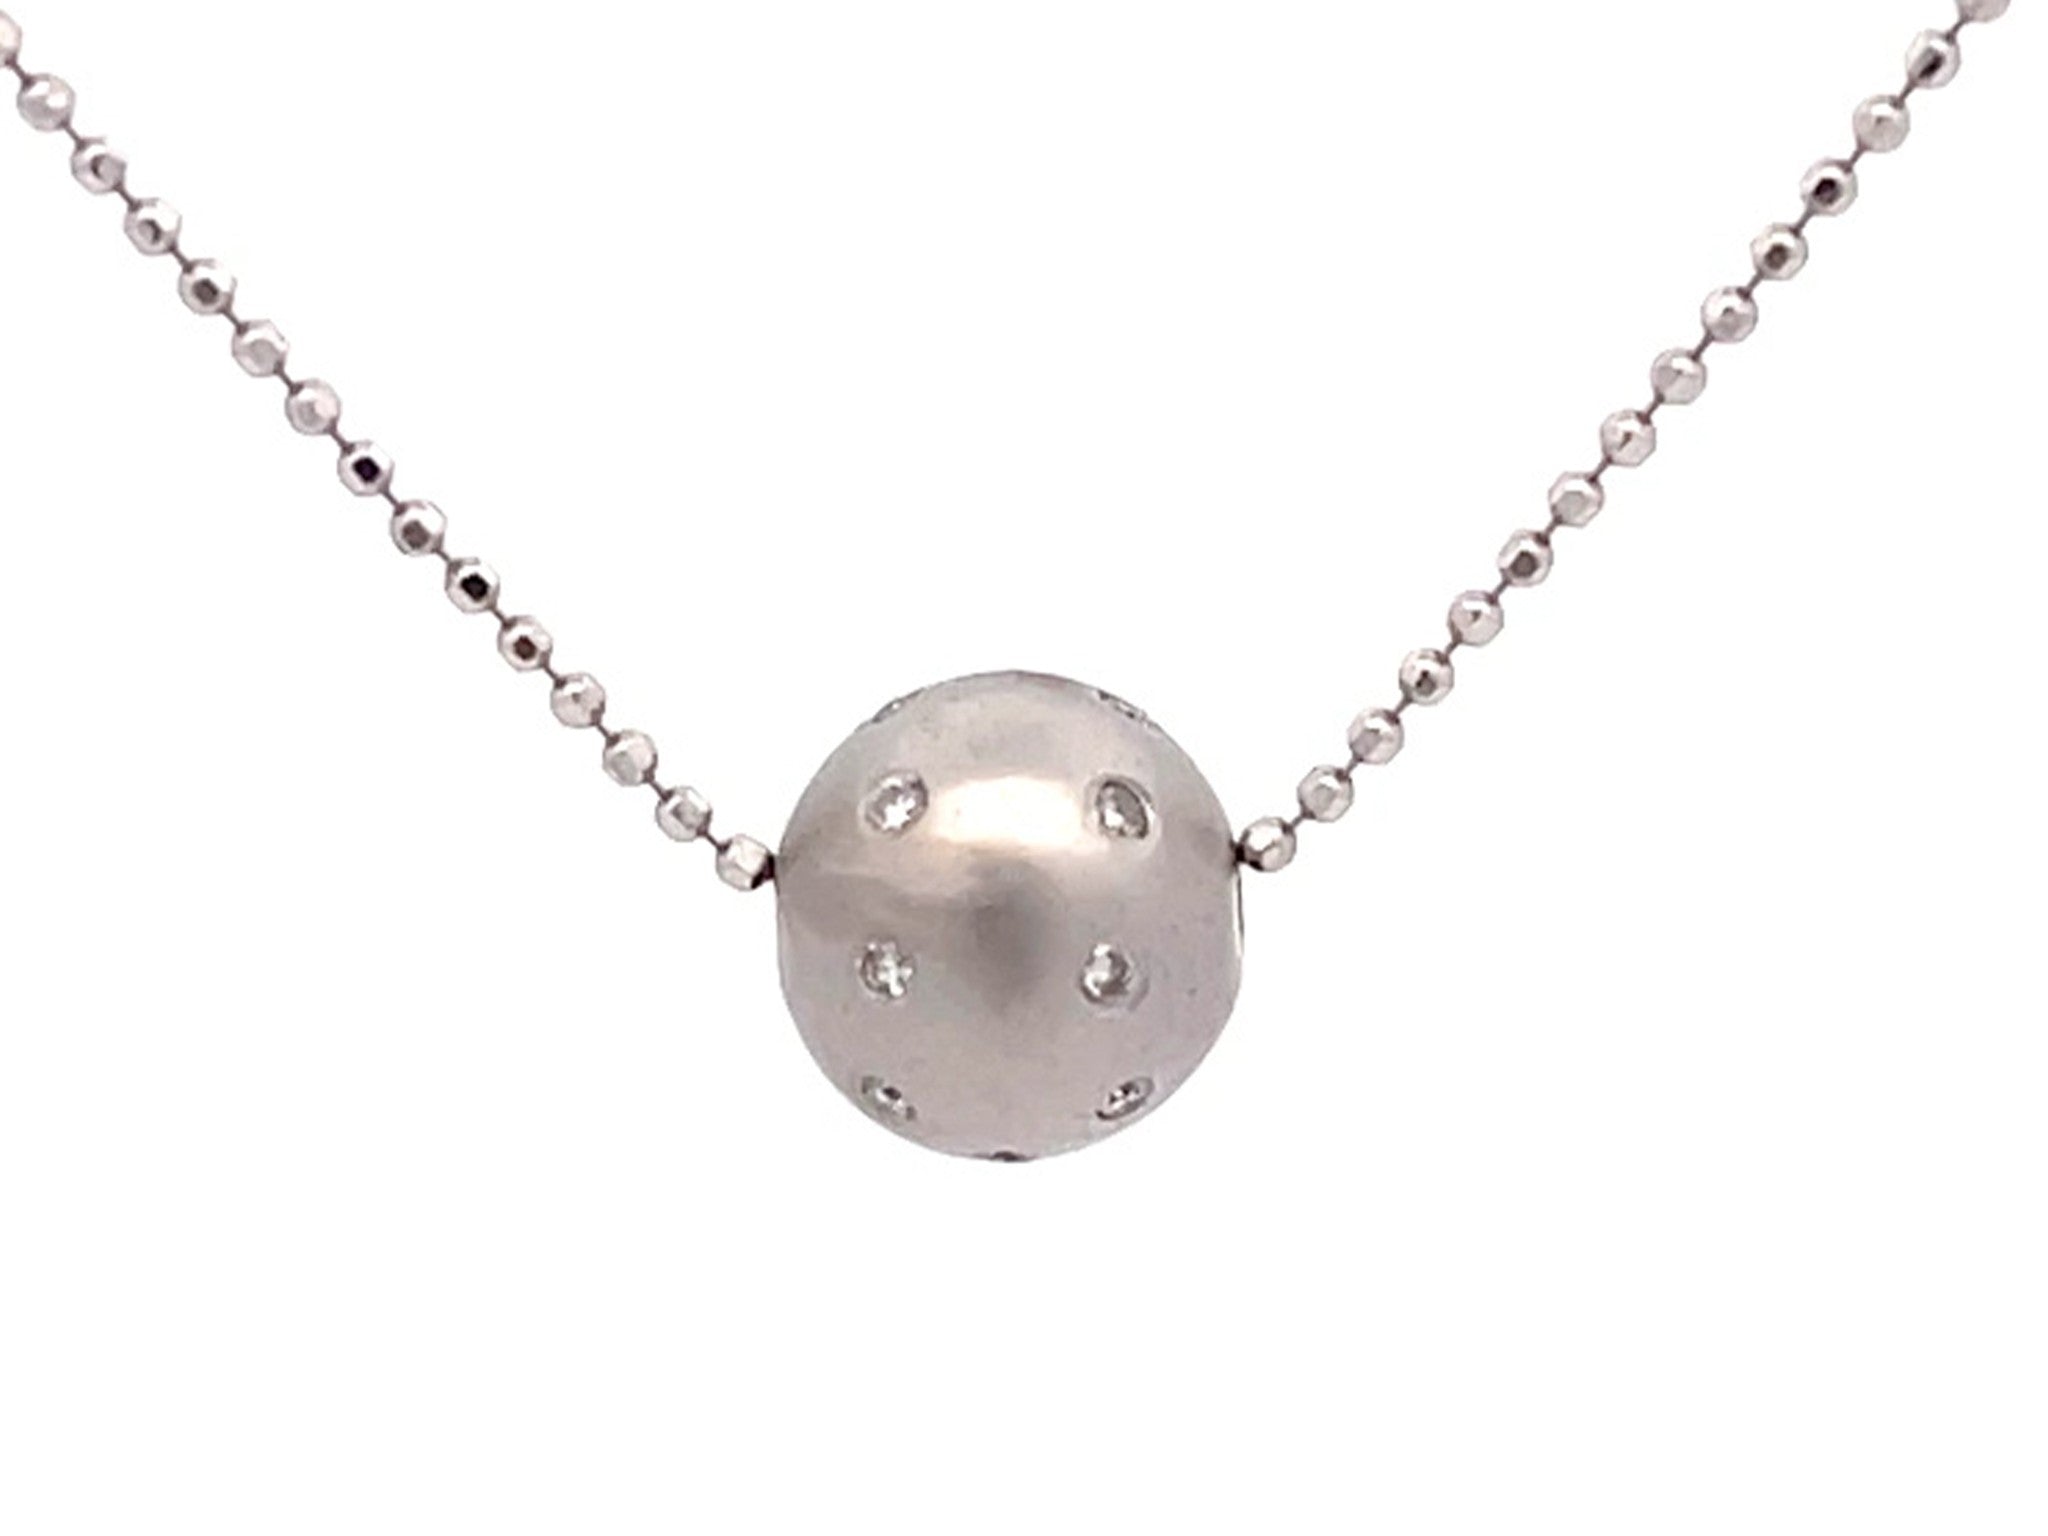 Diamond Ball Necklace in 18k White Gold